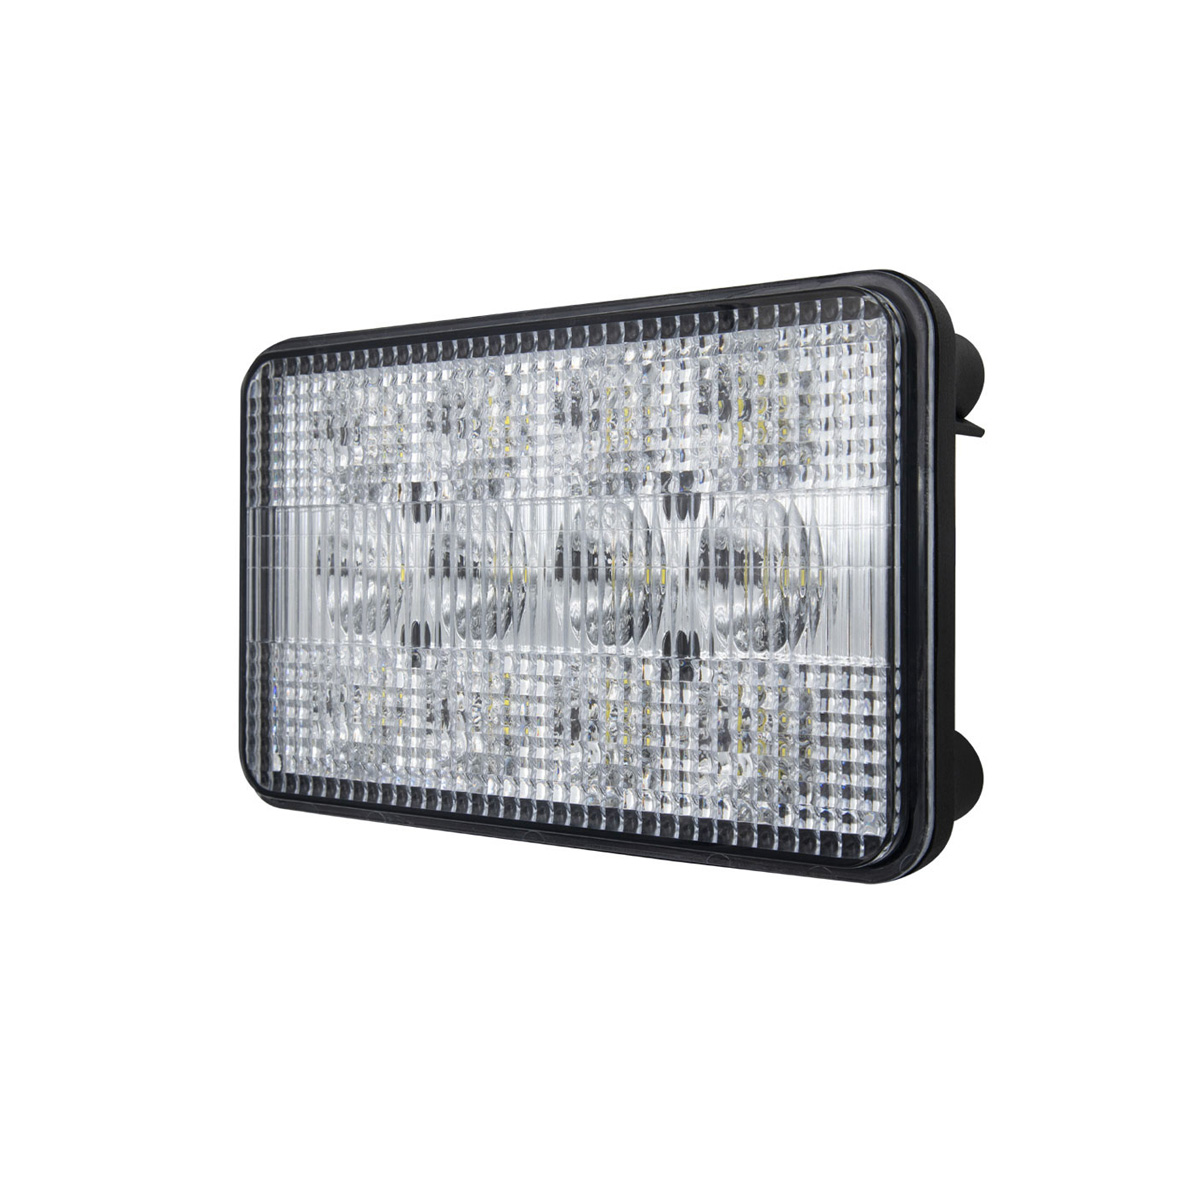 Agricultural Light - OW-5063-60W